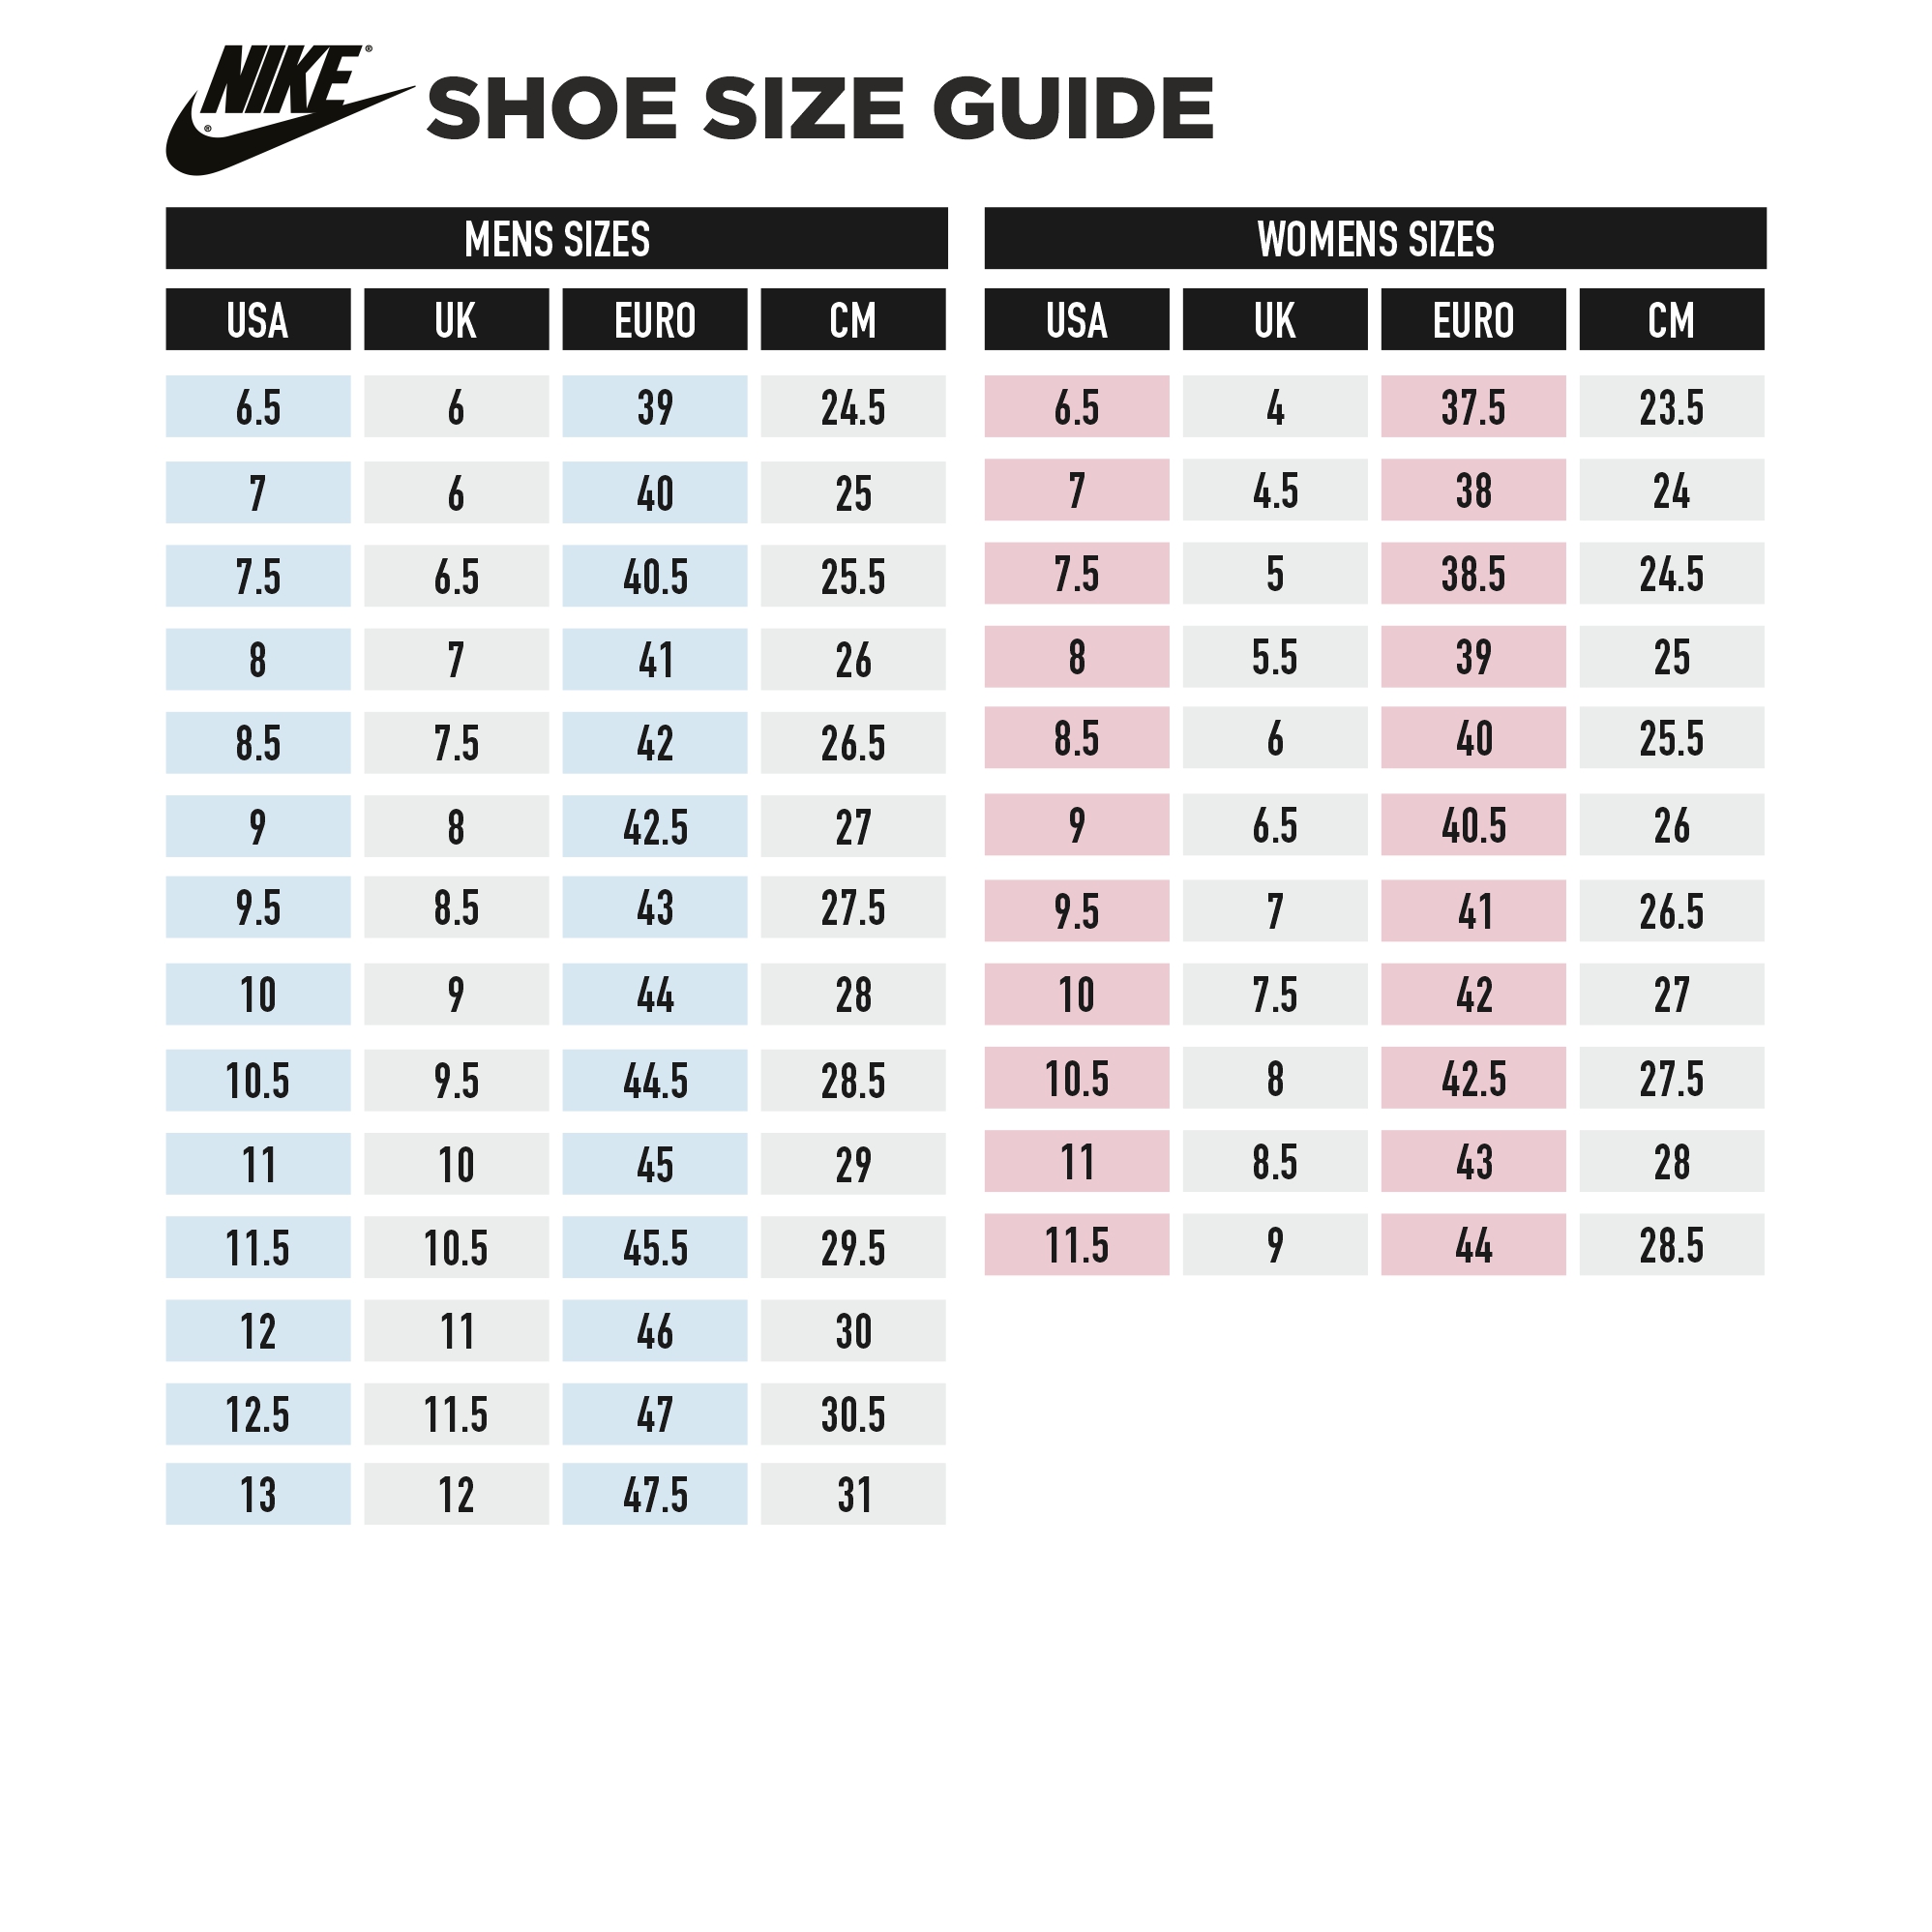 Adidas sizing guide: Find your fit